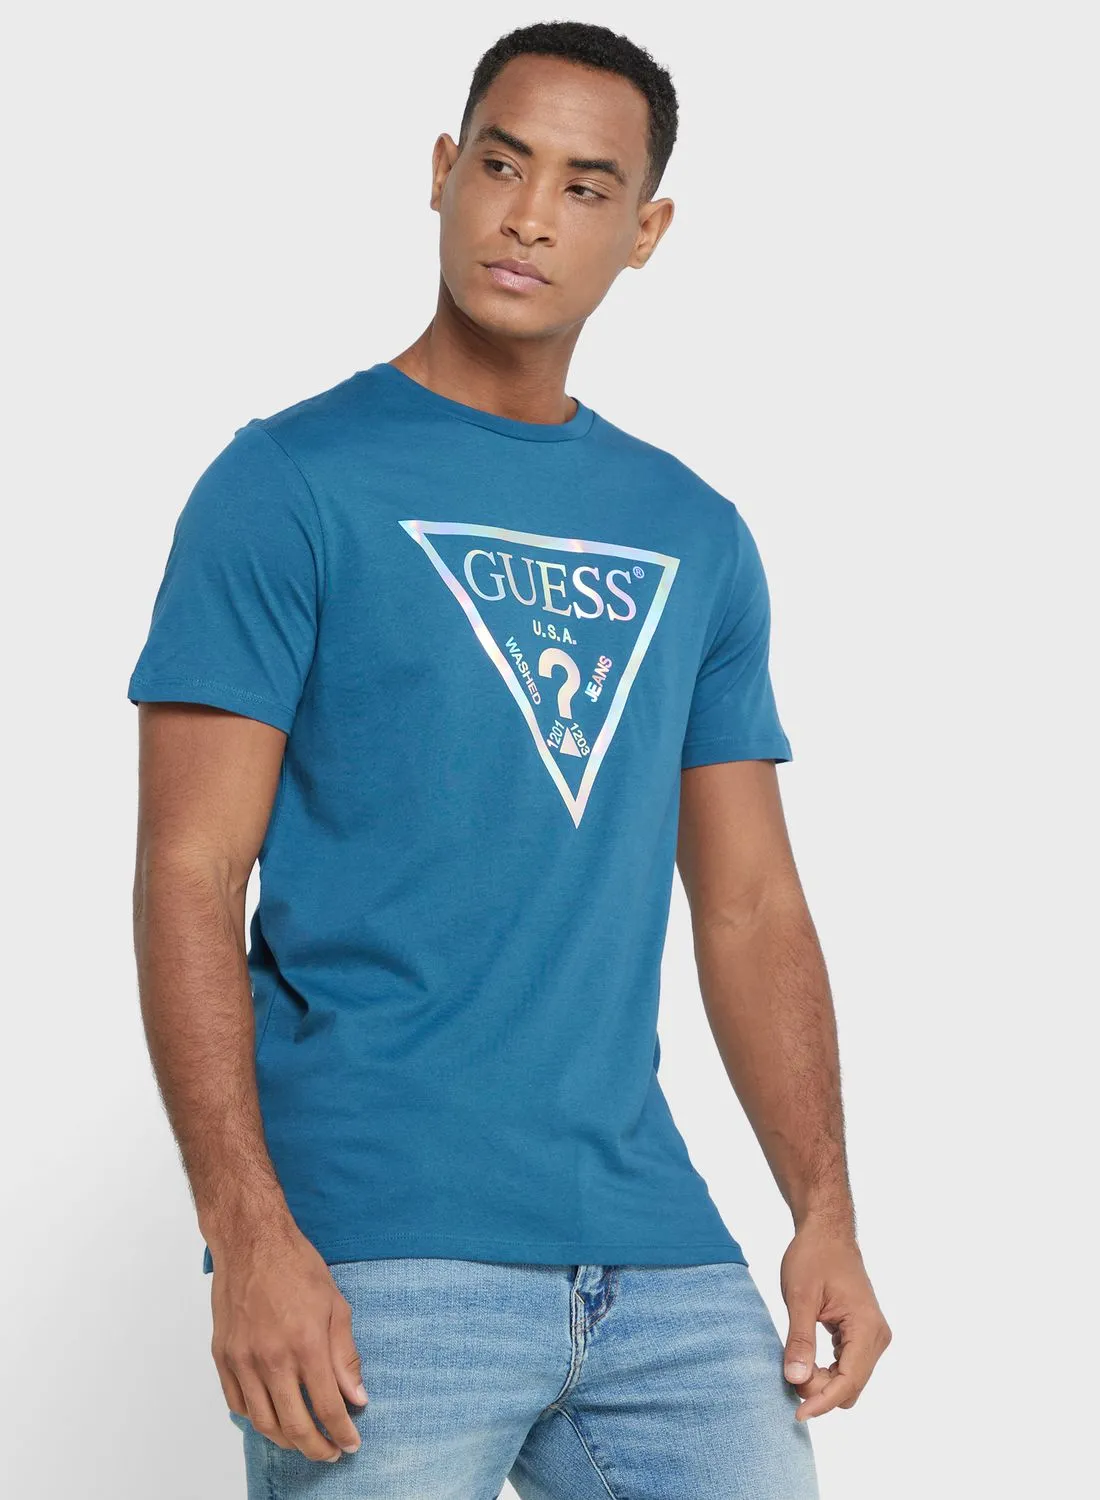 GUESS Graphic Crew Neck T-Shirt